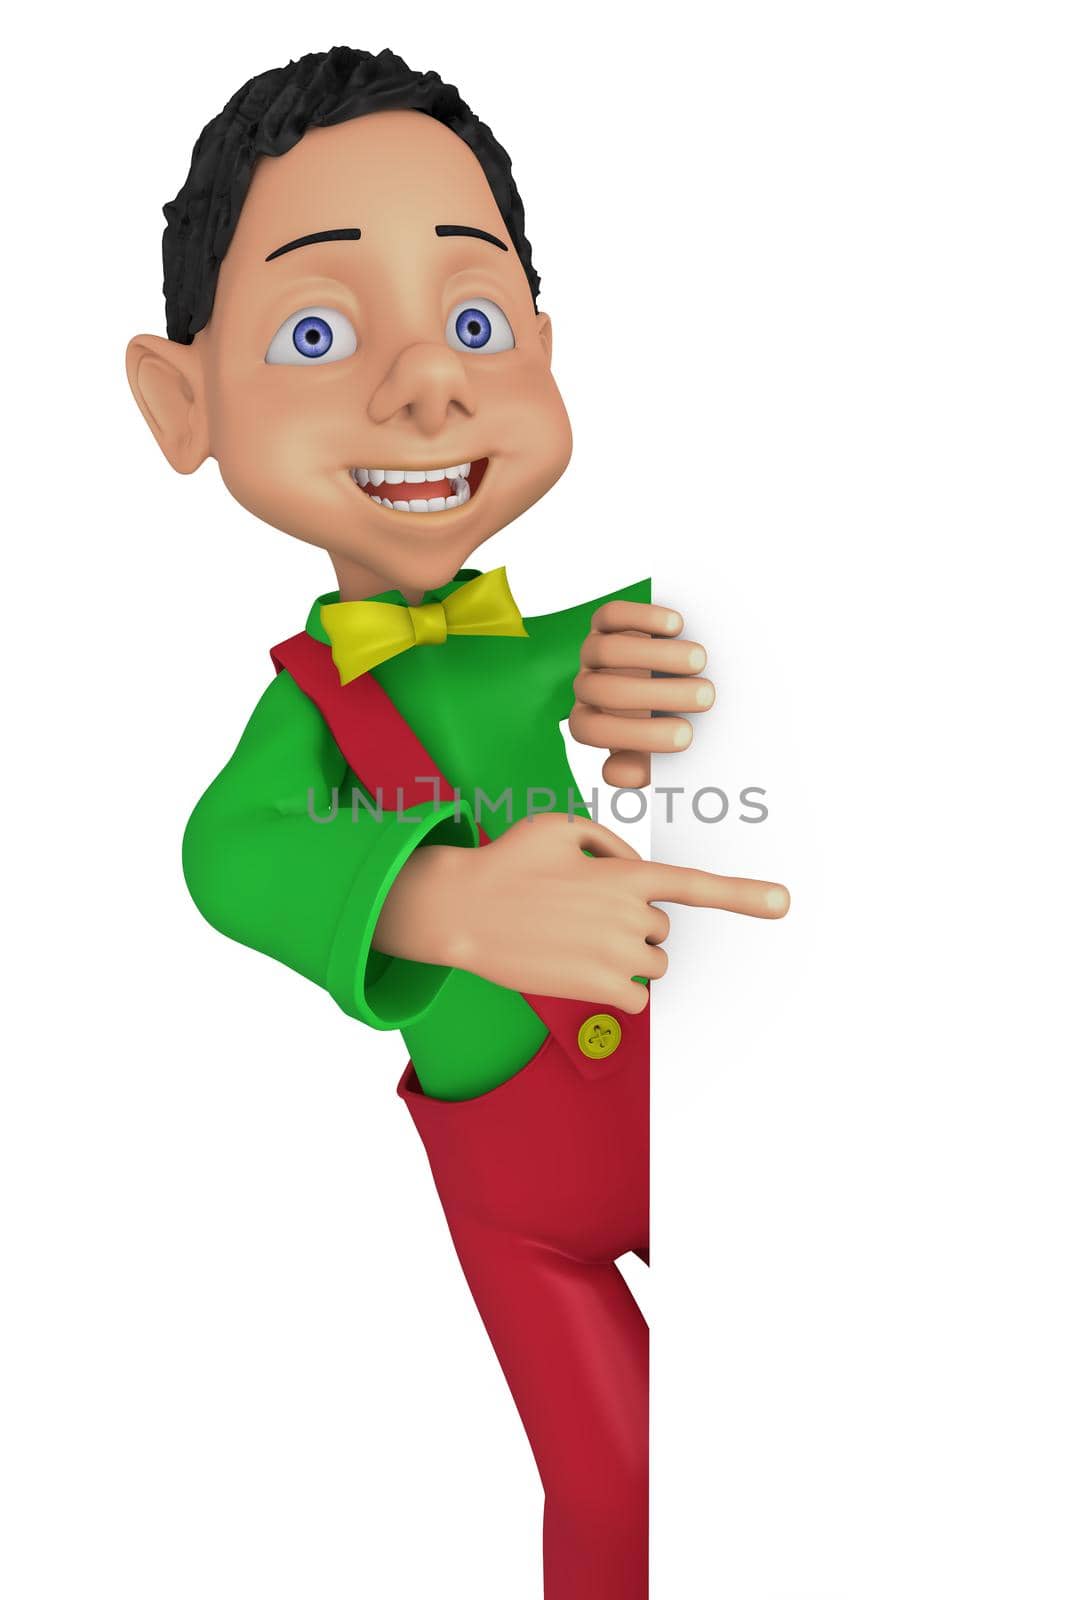 cheerful cartoon young boy in colored clothing